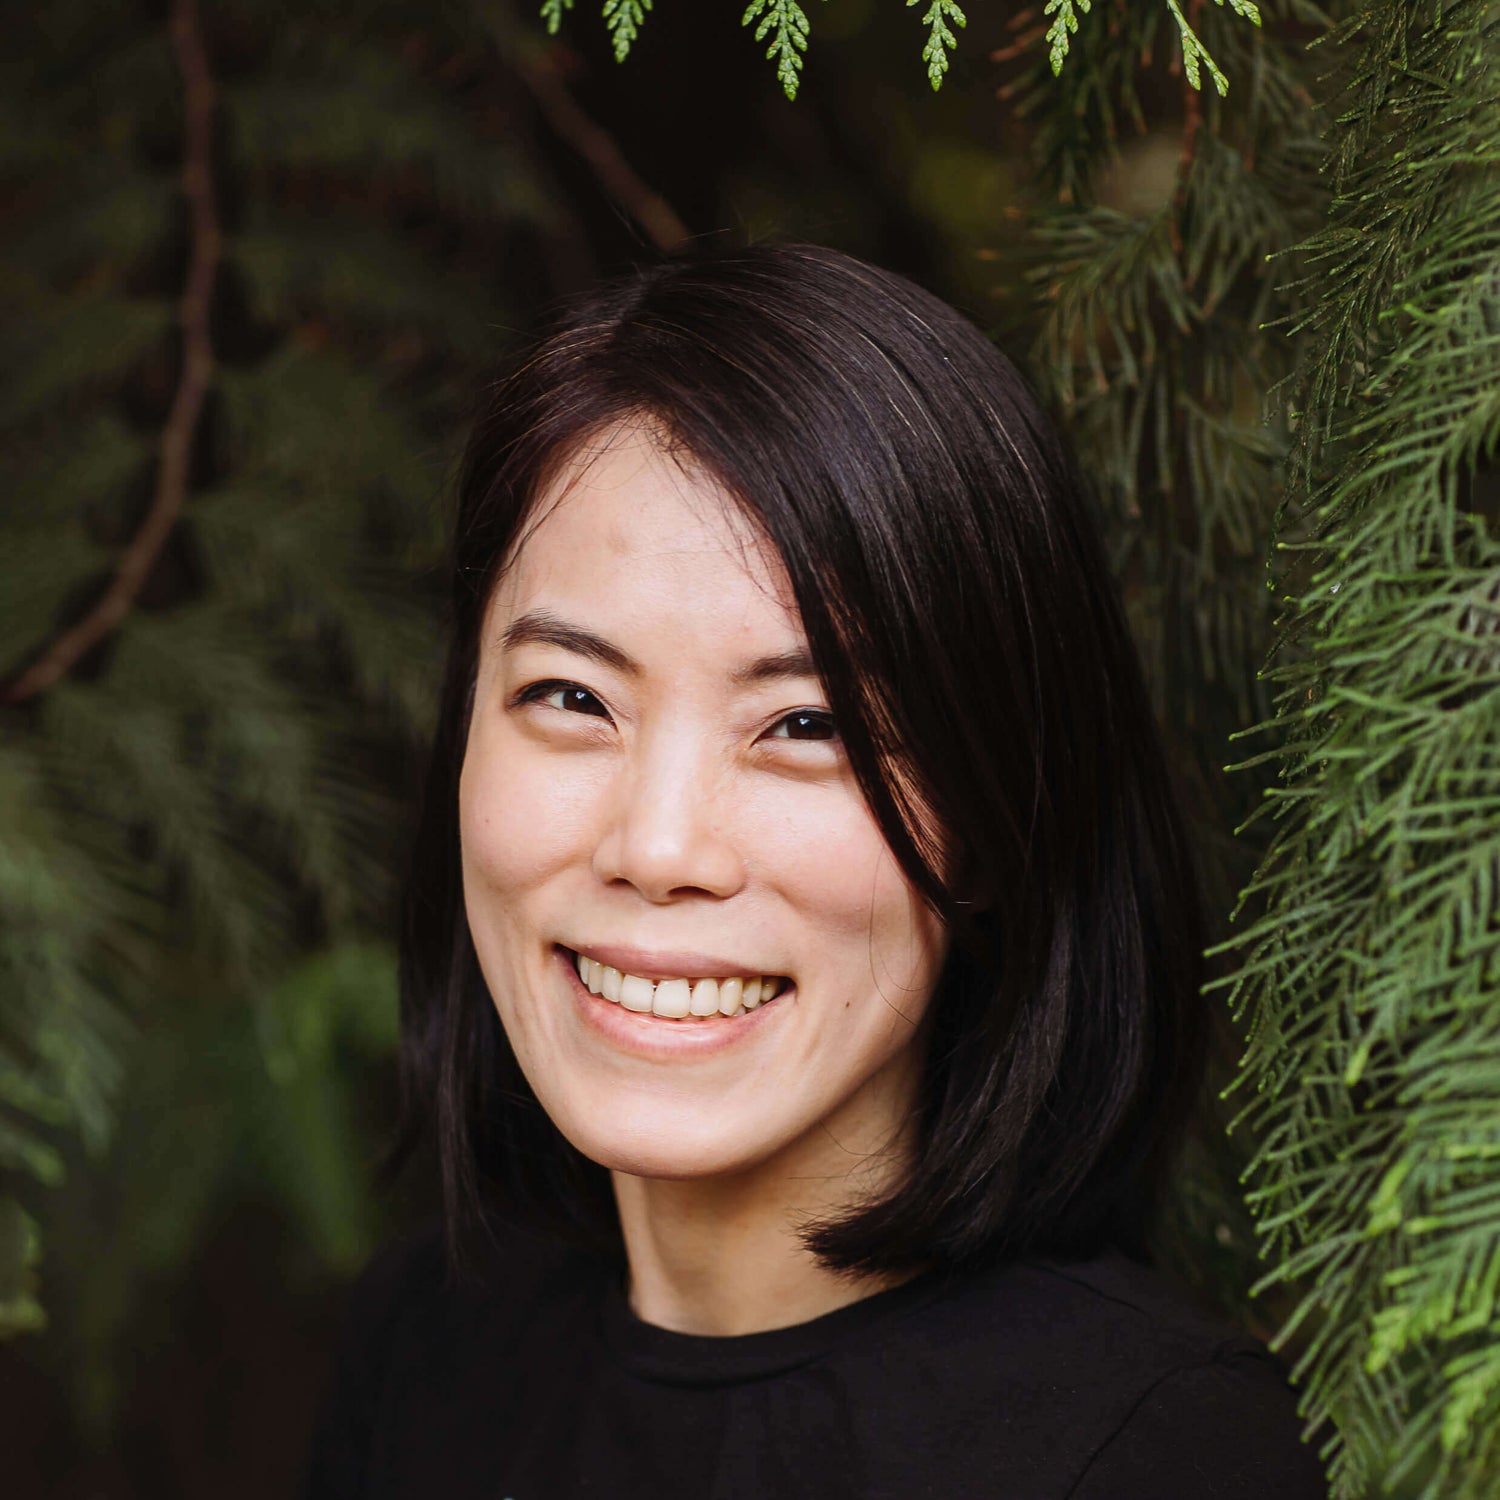 Lily Wang, Ph.D. Co-founder of Arcwell & VitaHelix Nutraceuticals Ltd.